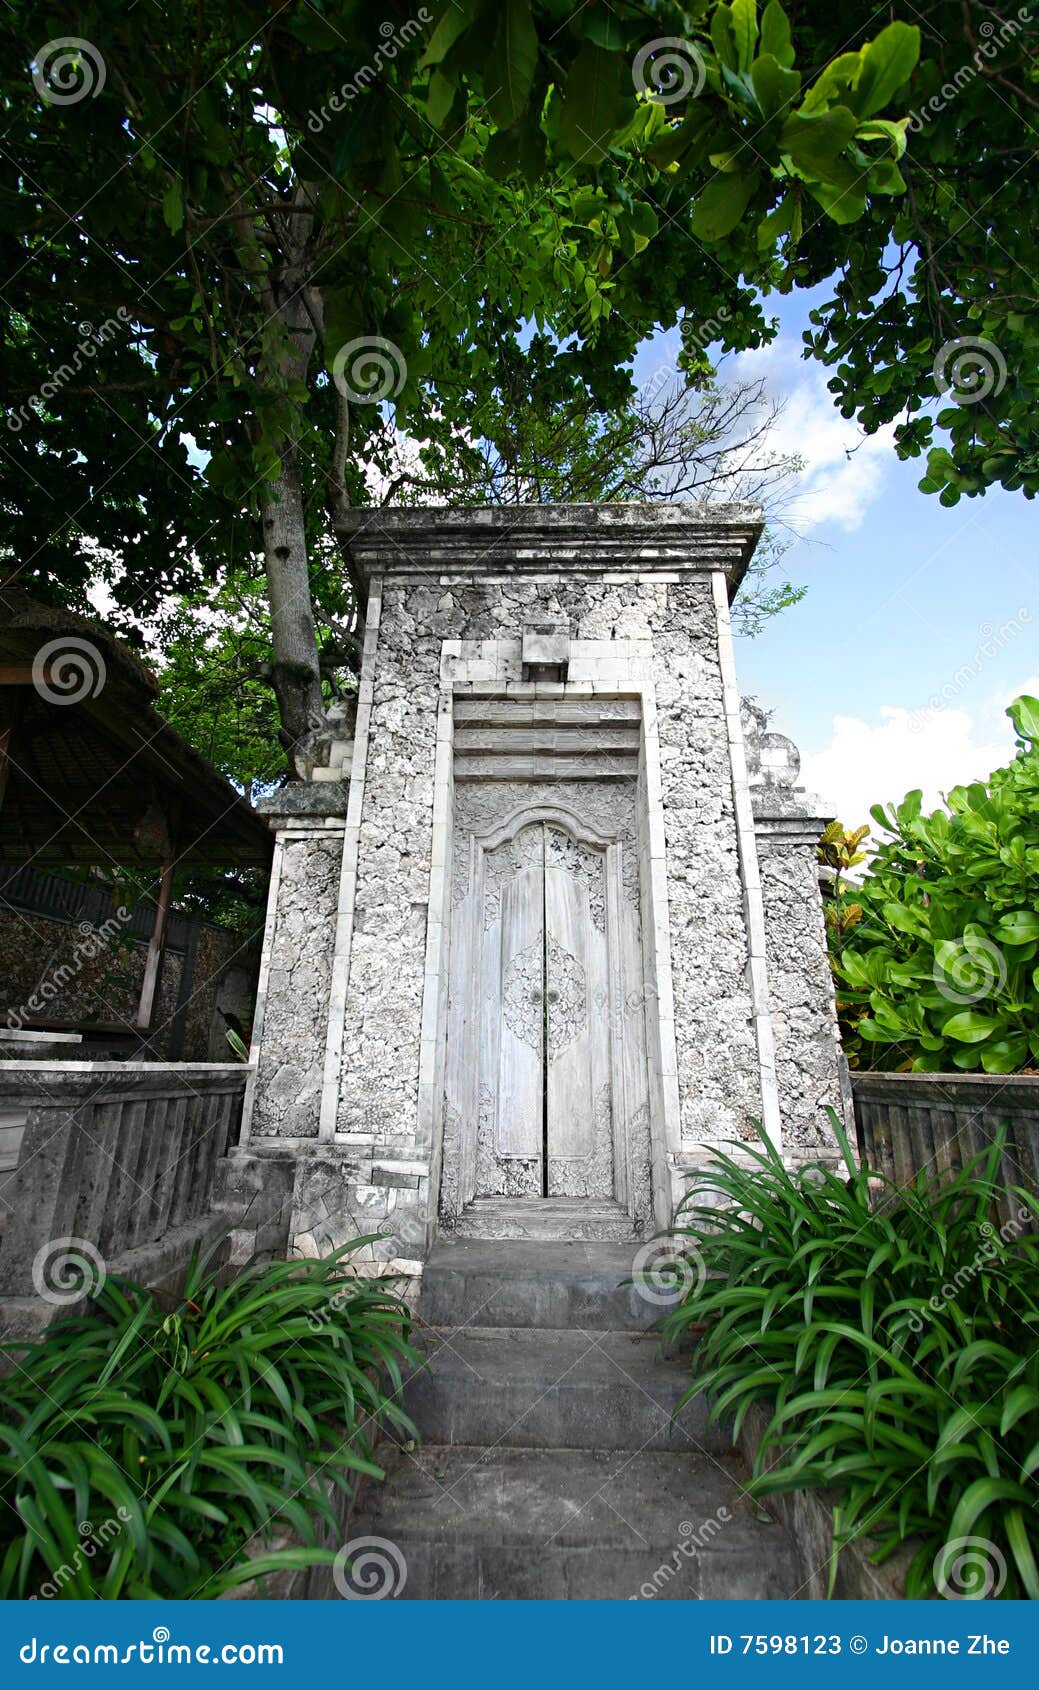 More similar stock images of ` Old Bali house entrance `